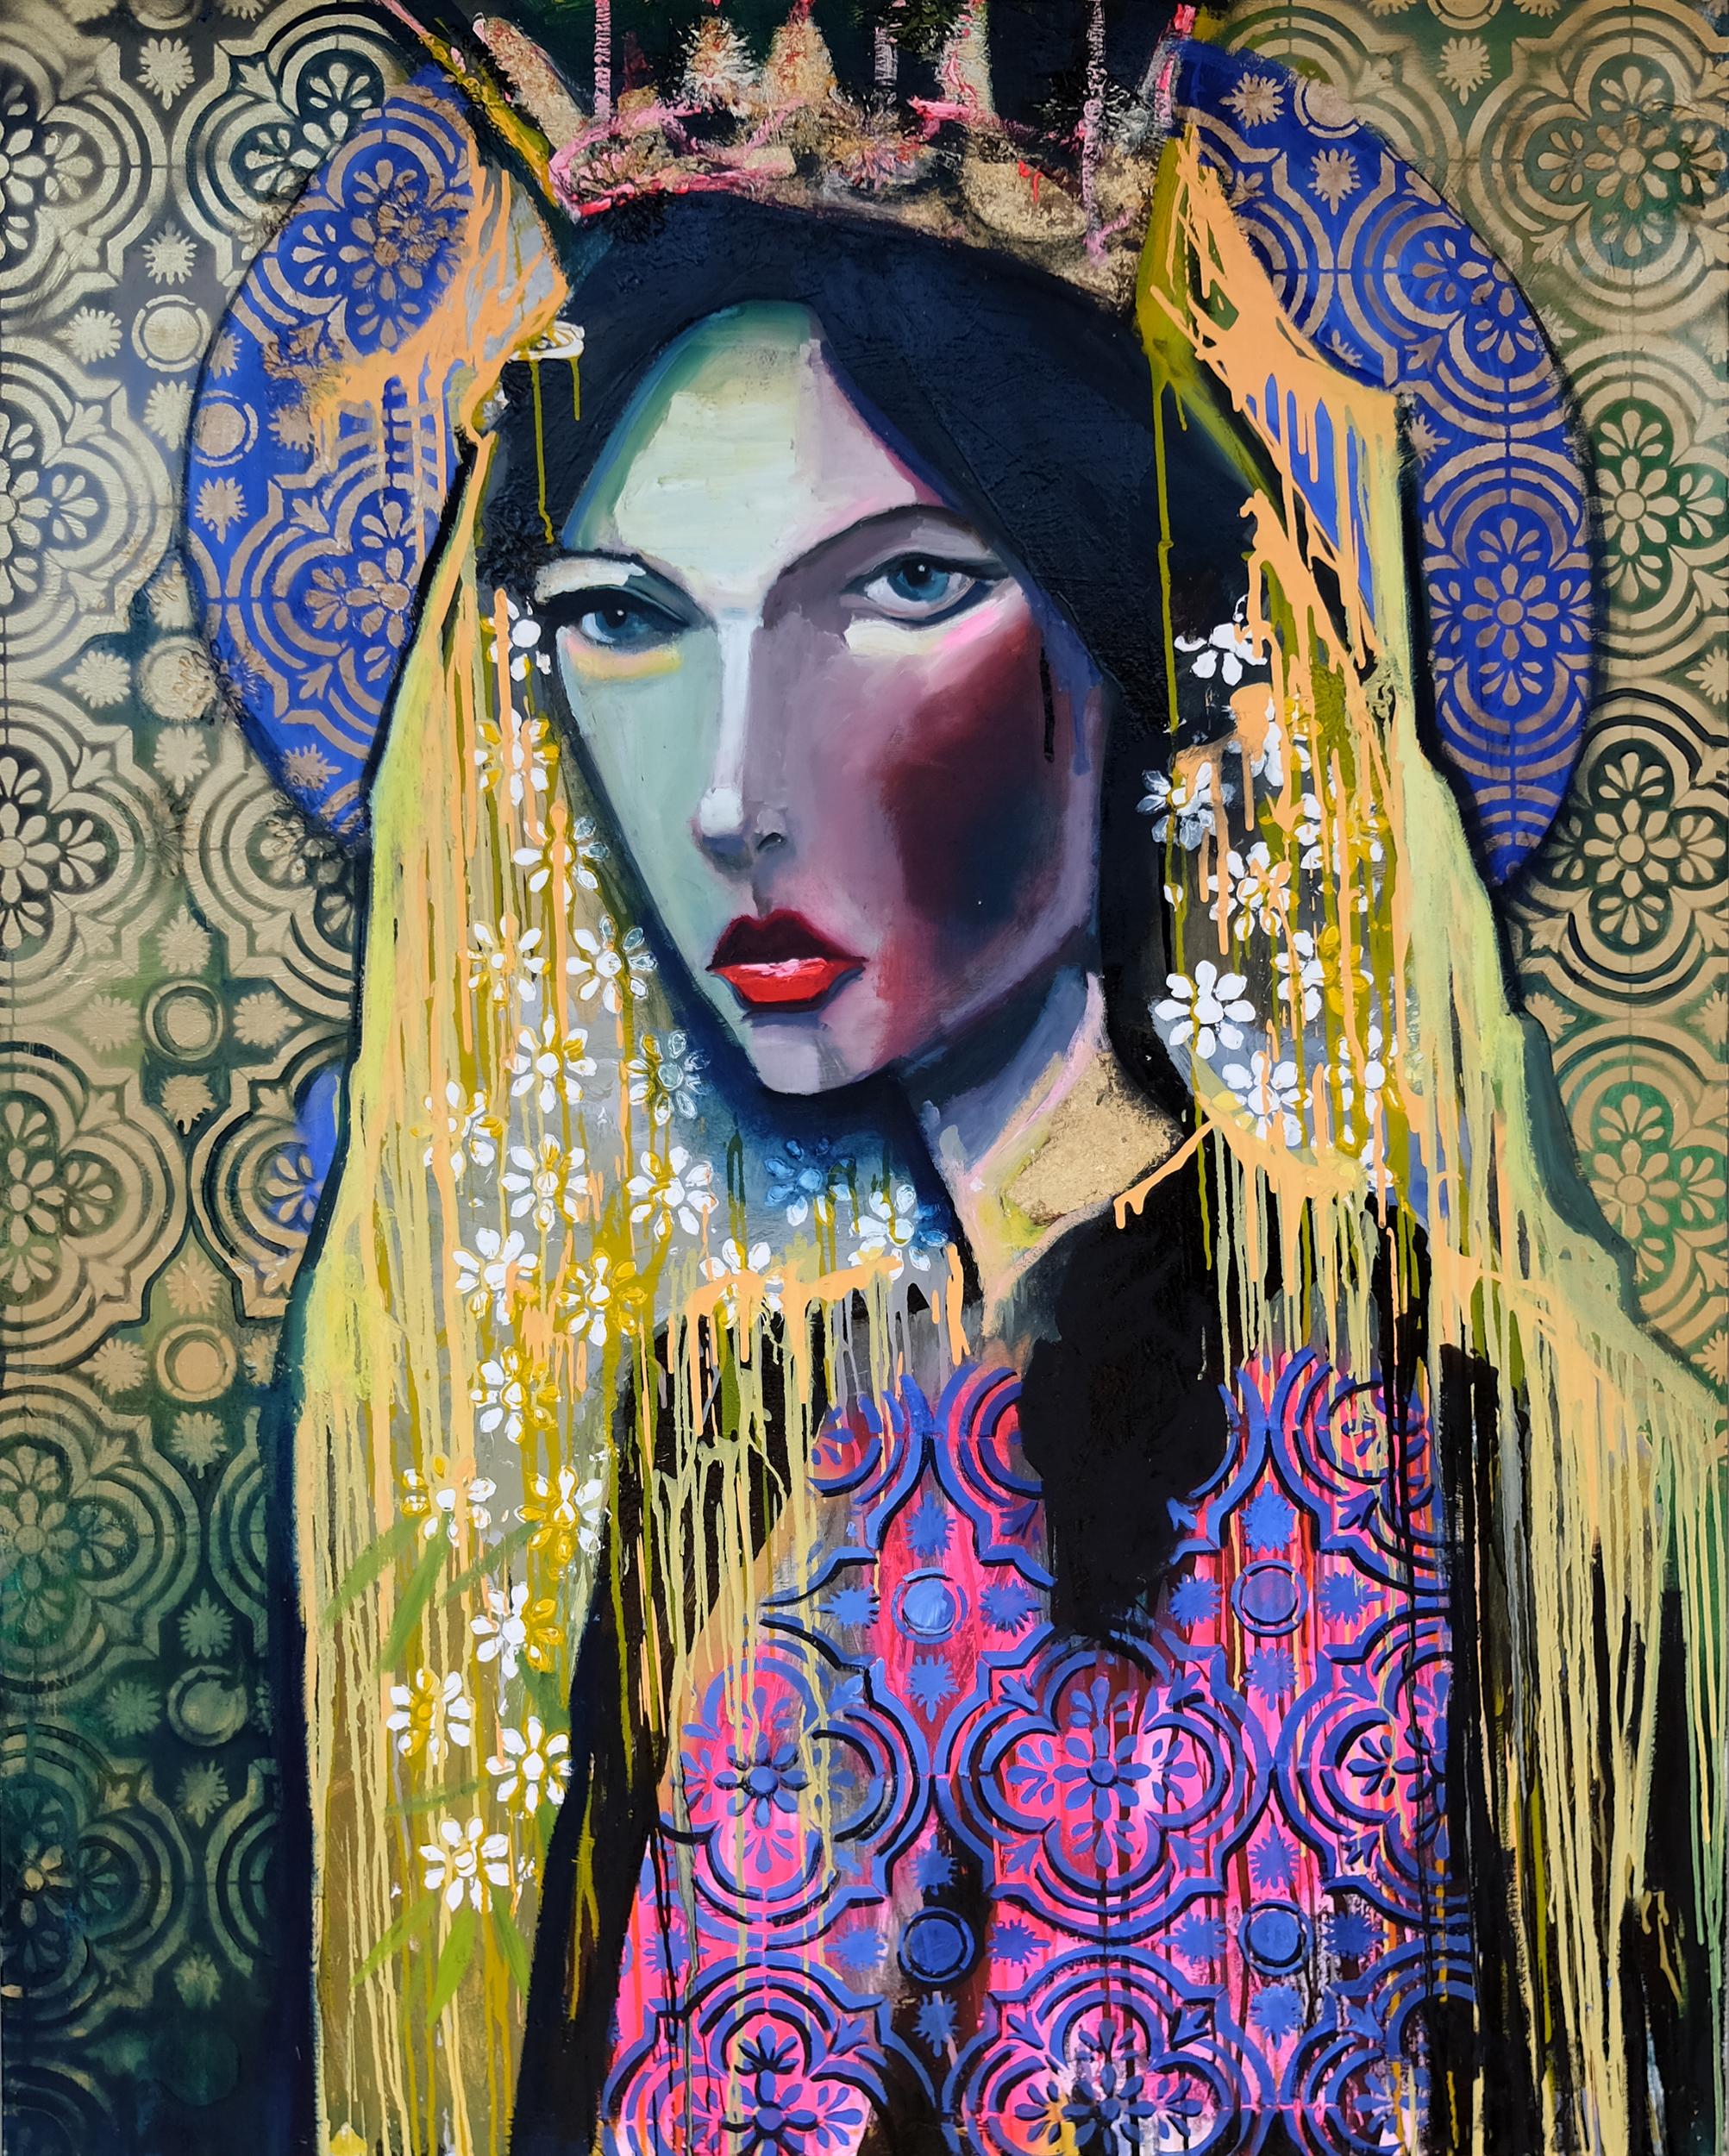 Decorated Queen, Original Painting - Mixed Media Art by Scott Dykema